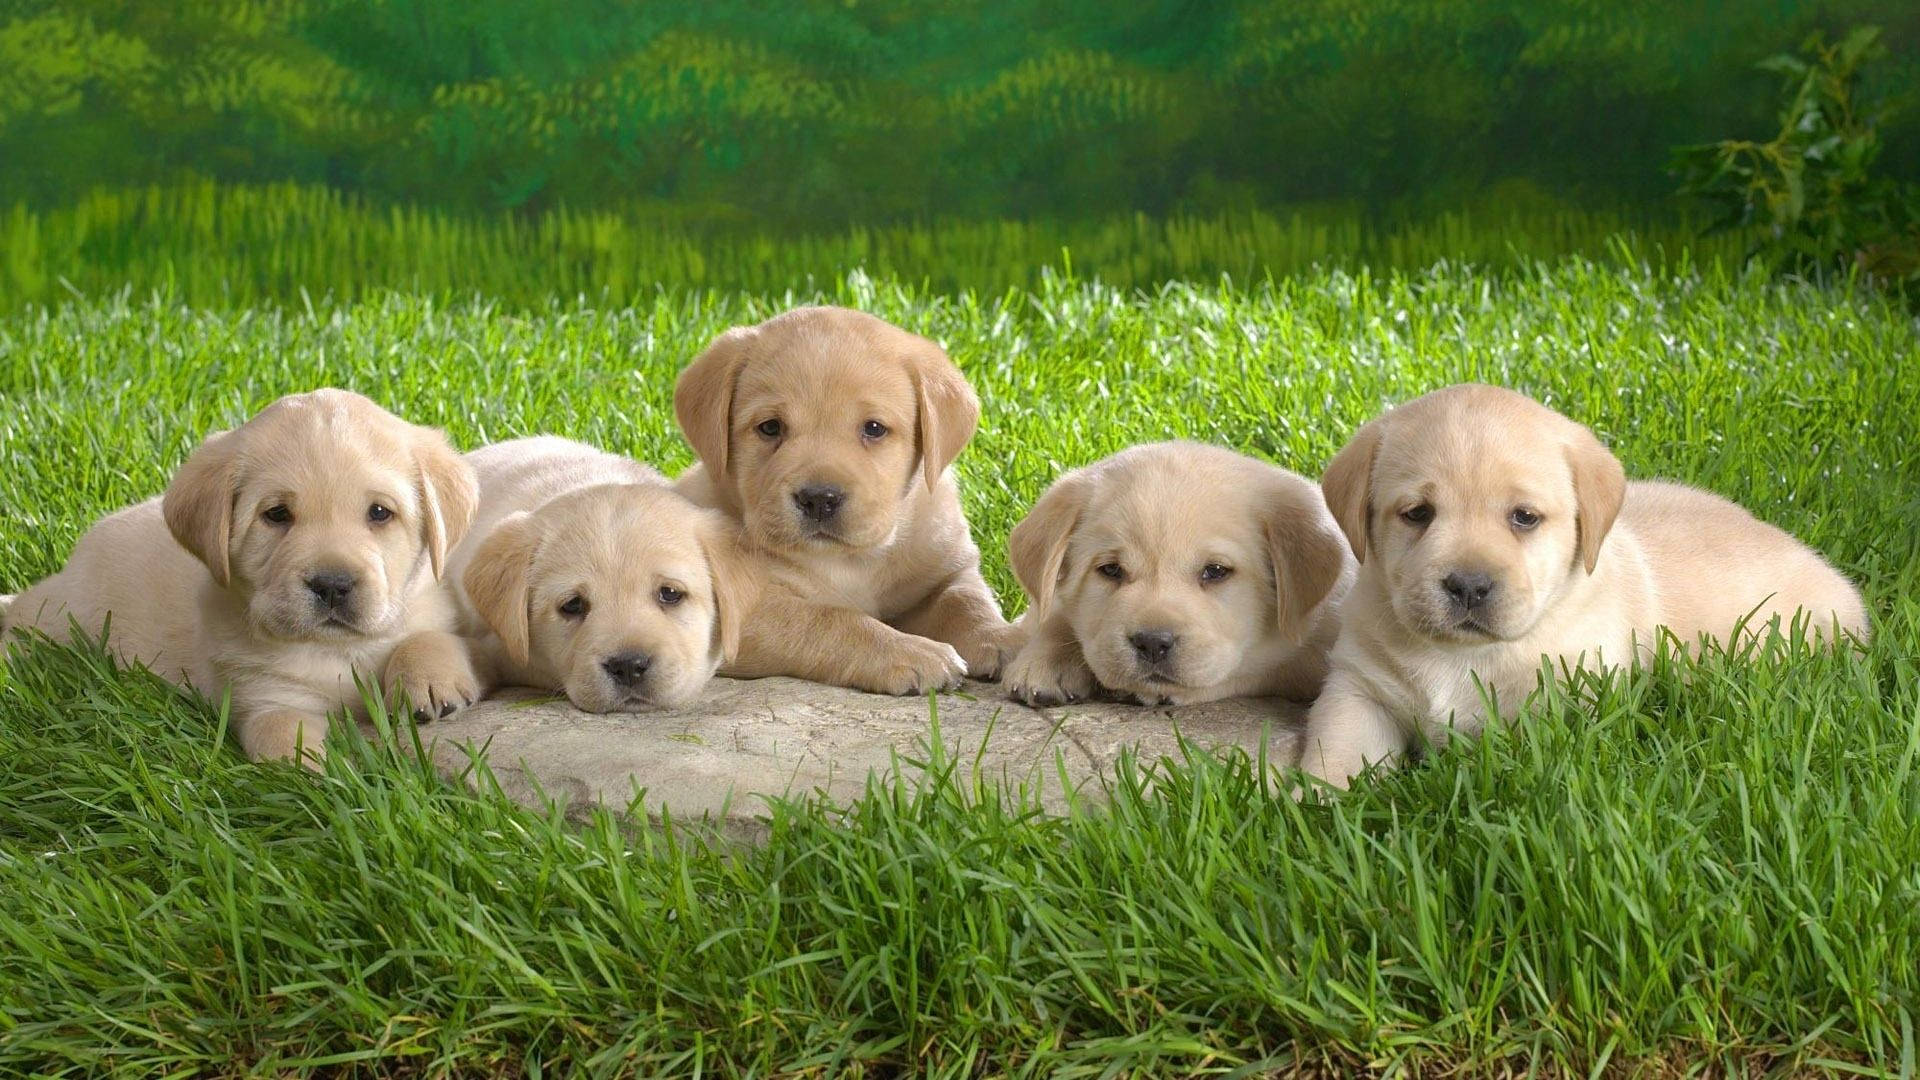 Baby Animal Puppies On The Field Background